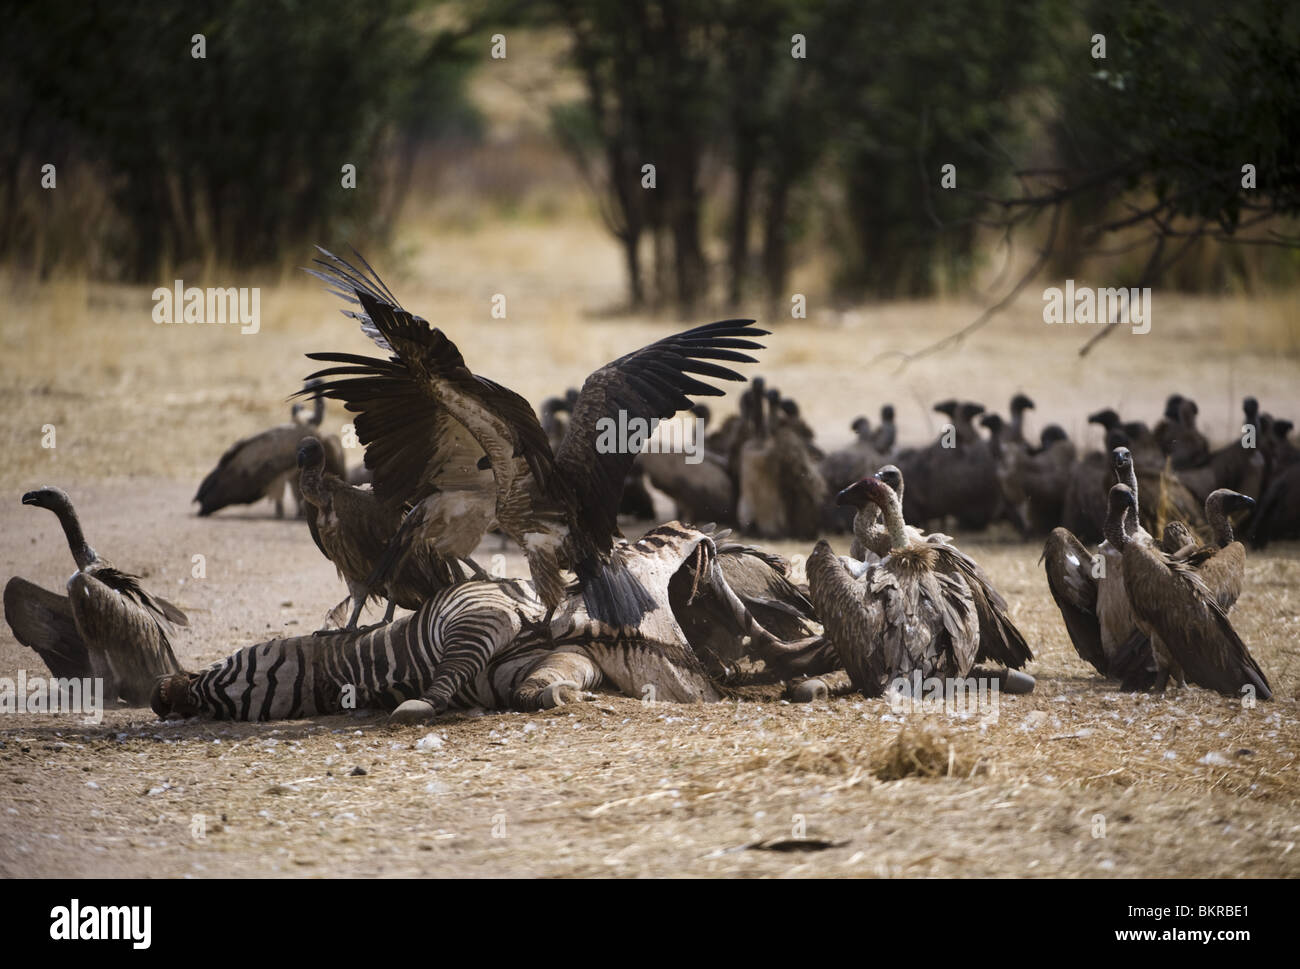 Vultures around a zebra carcass killed by lions the night before, Hobatere, Damaraland, northern Namibia. Stock Photo